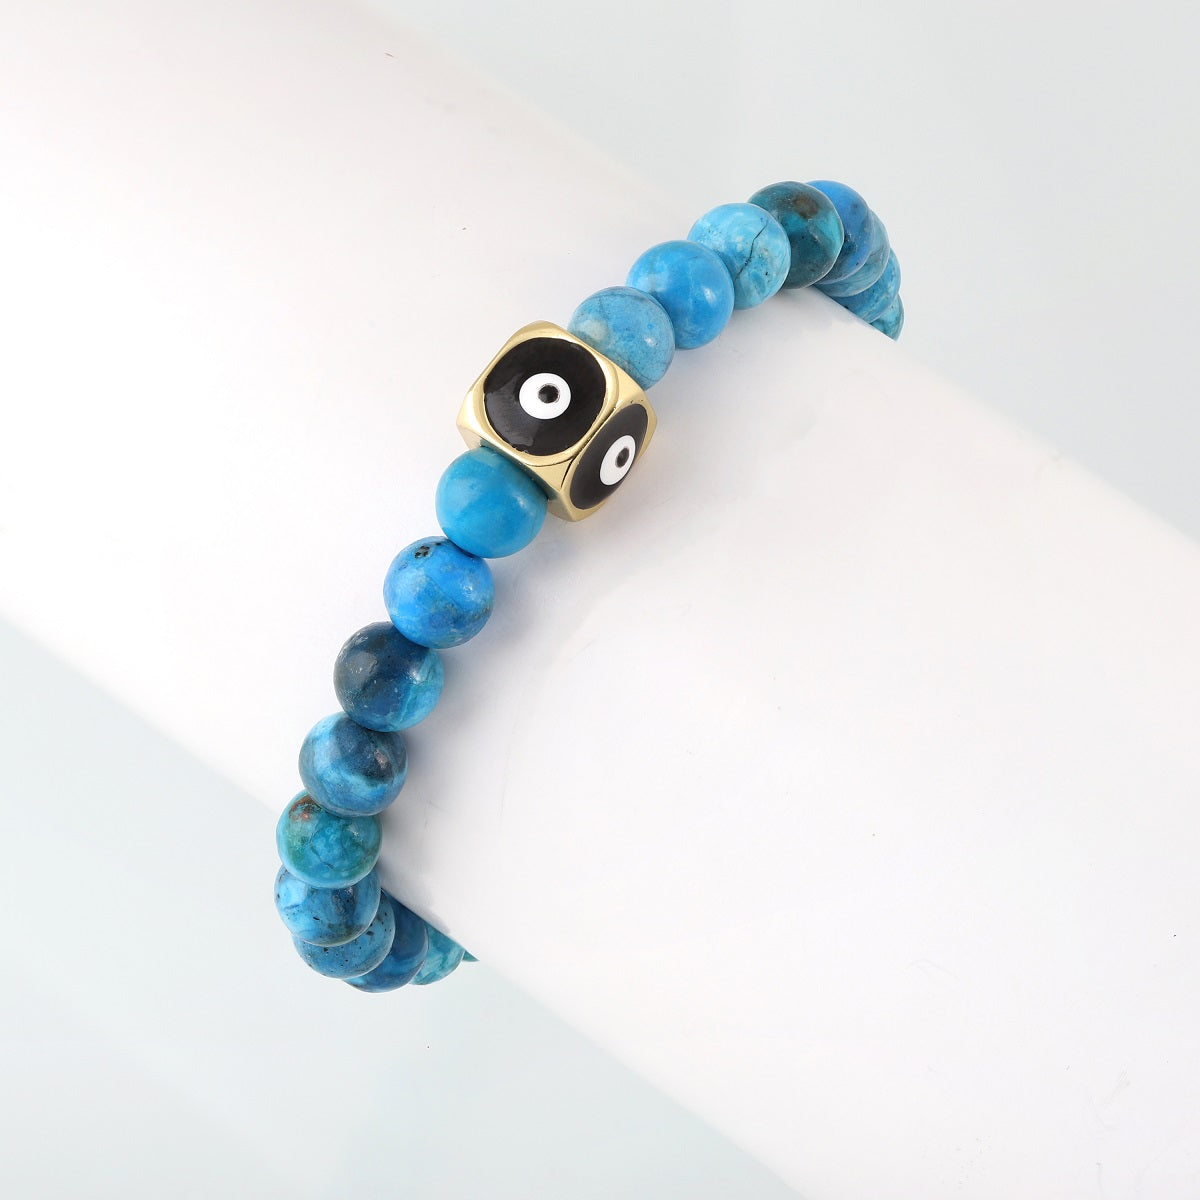  An intricate bead with the Evil Eye symbol, believed to ward off negativity and provide a shield of protection, on a gemstone bracelet.